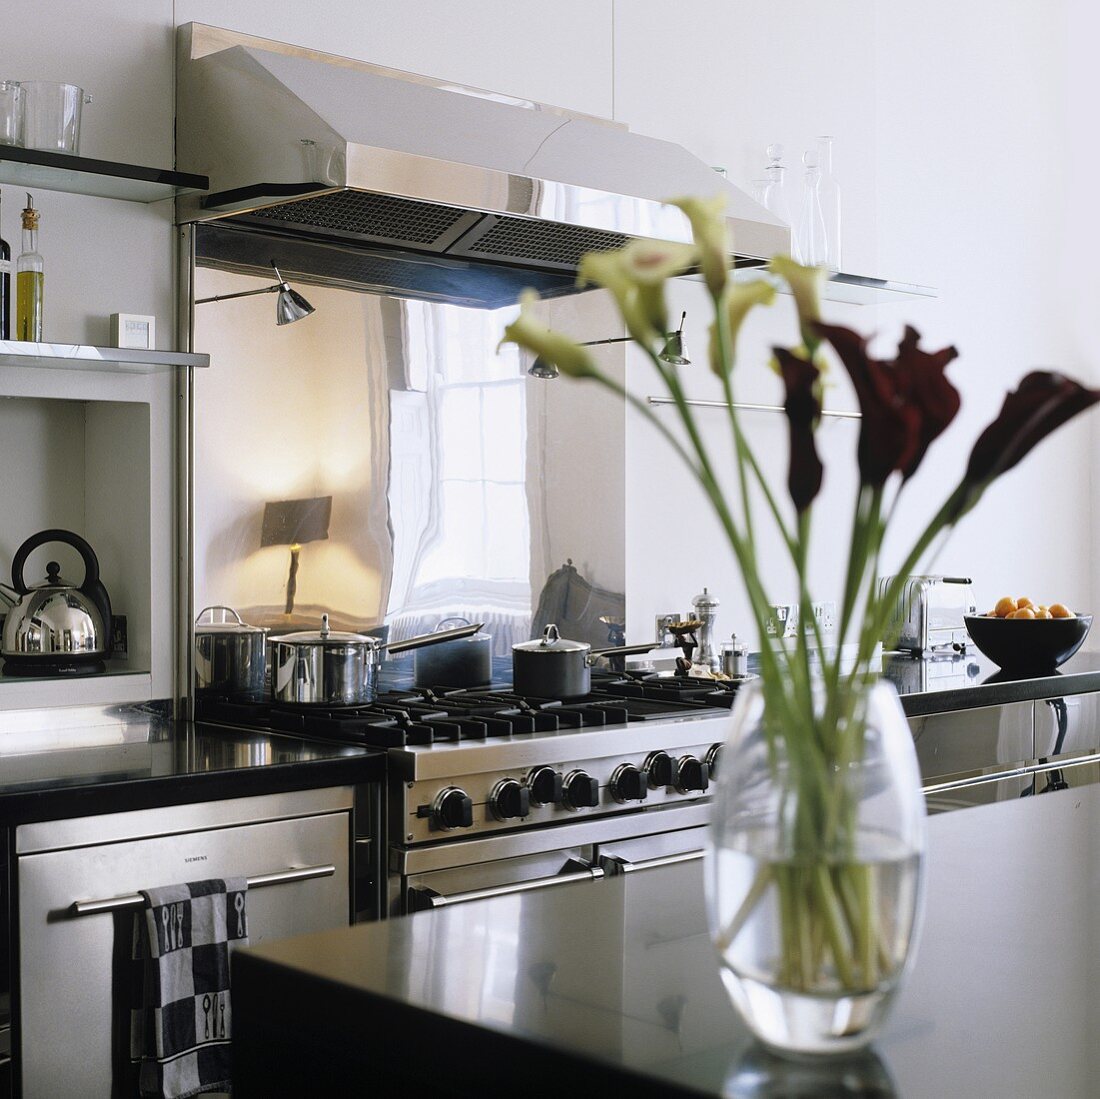 A stainless steel cooker with an extractor fan and a vase of lilies